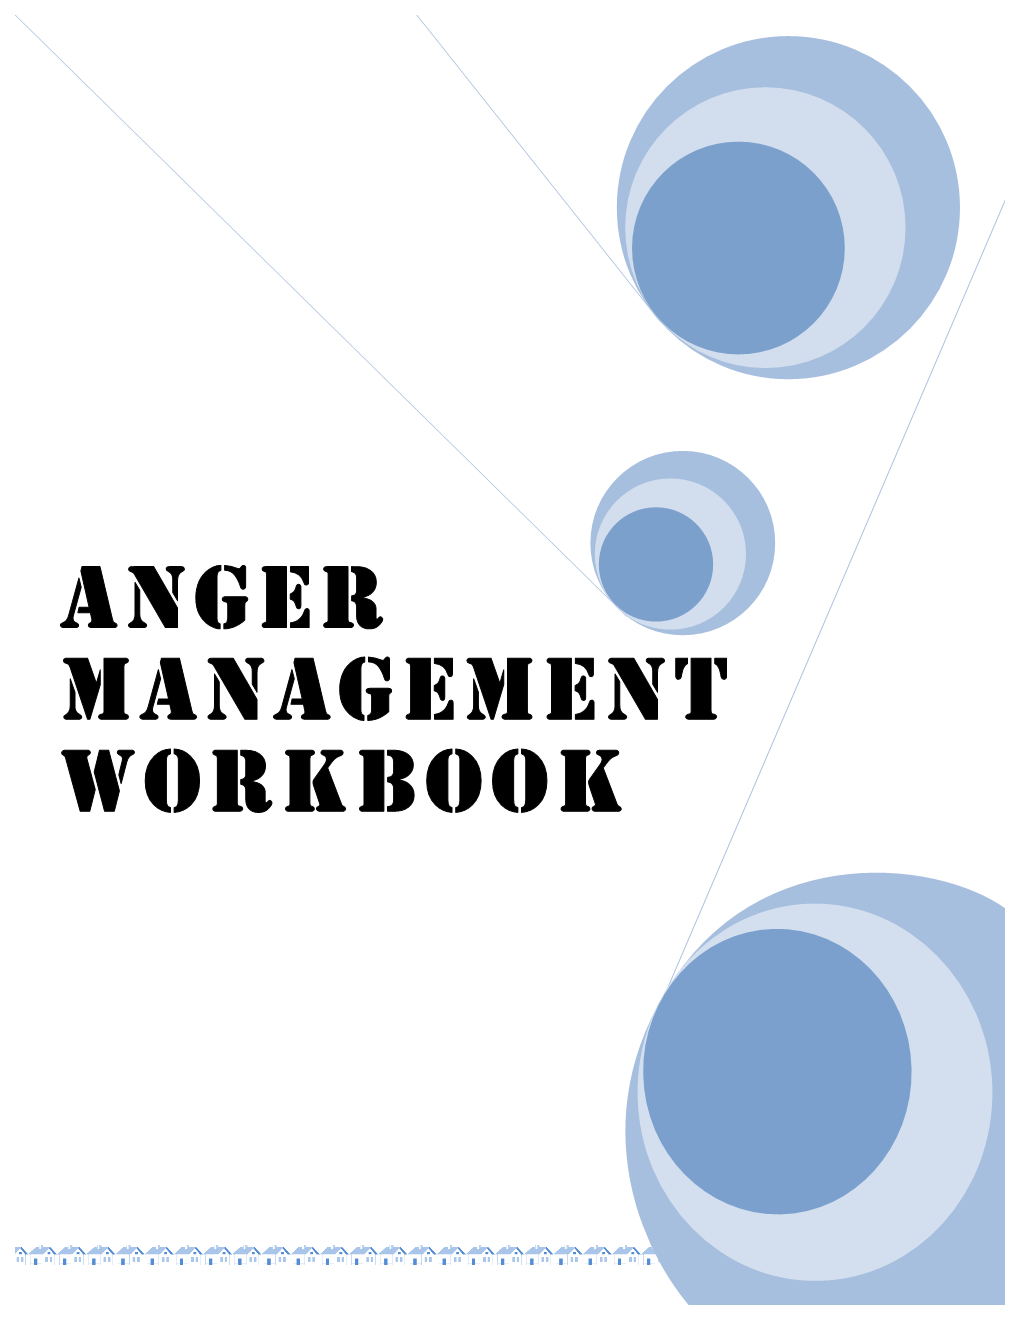 ANGER MANAGEMENT WORKBOOK WHAT CAUSES ANGER? Some Common Causes of the Causes Vary from Person to Person Anger Include: and from Situation to Situation